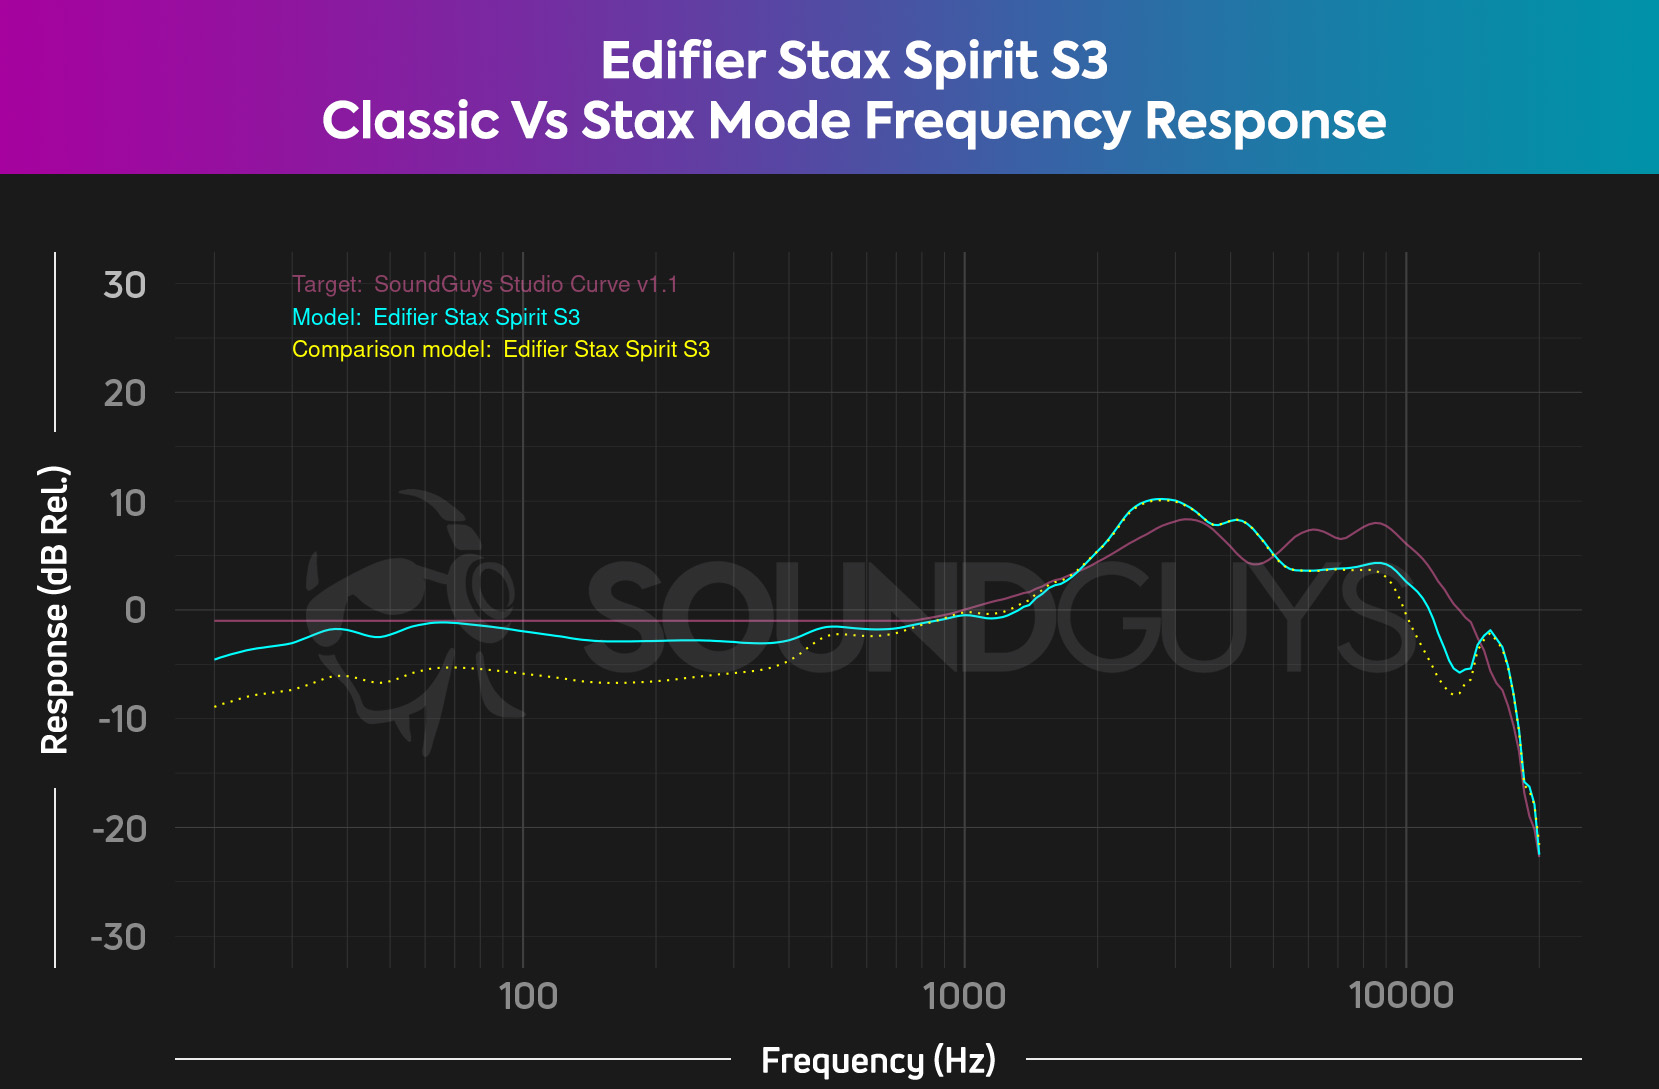 A chart comparing the frequency response of the Edifier Stax Spirit S3 Classic mode with Stax mode